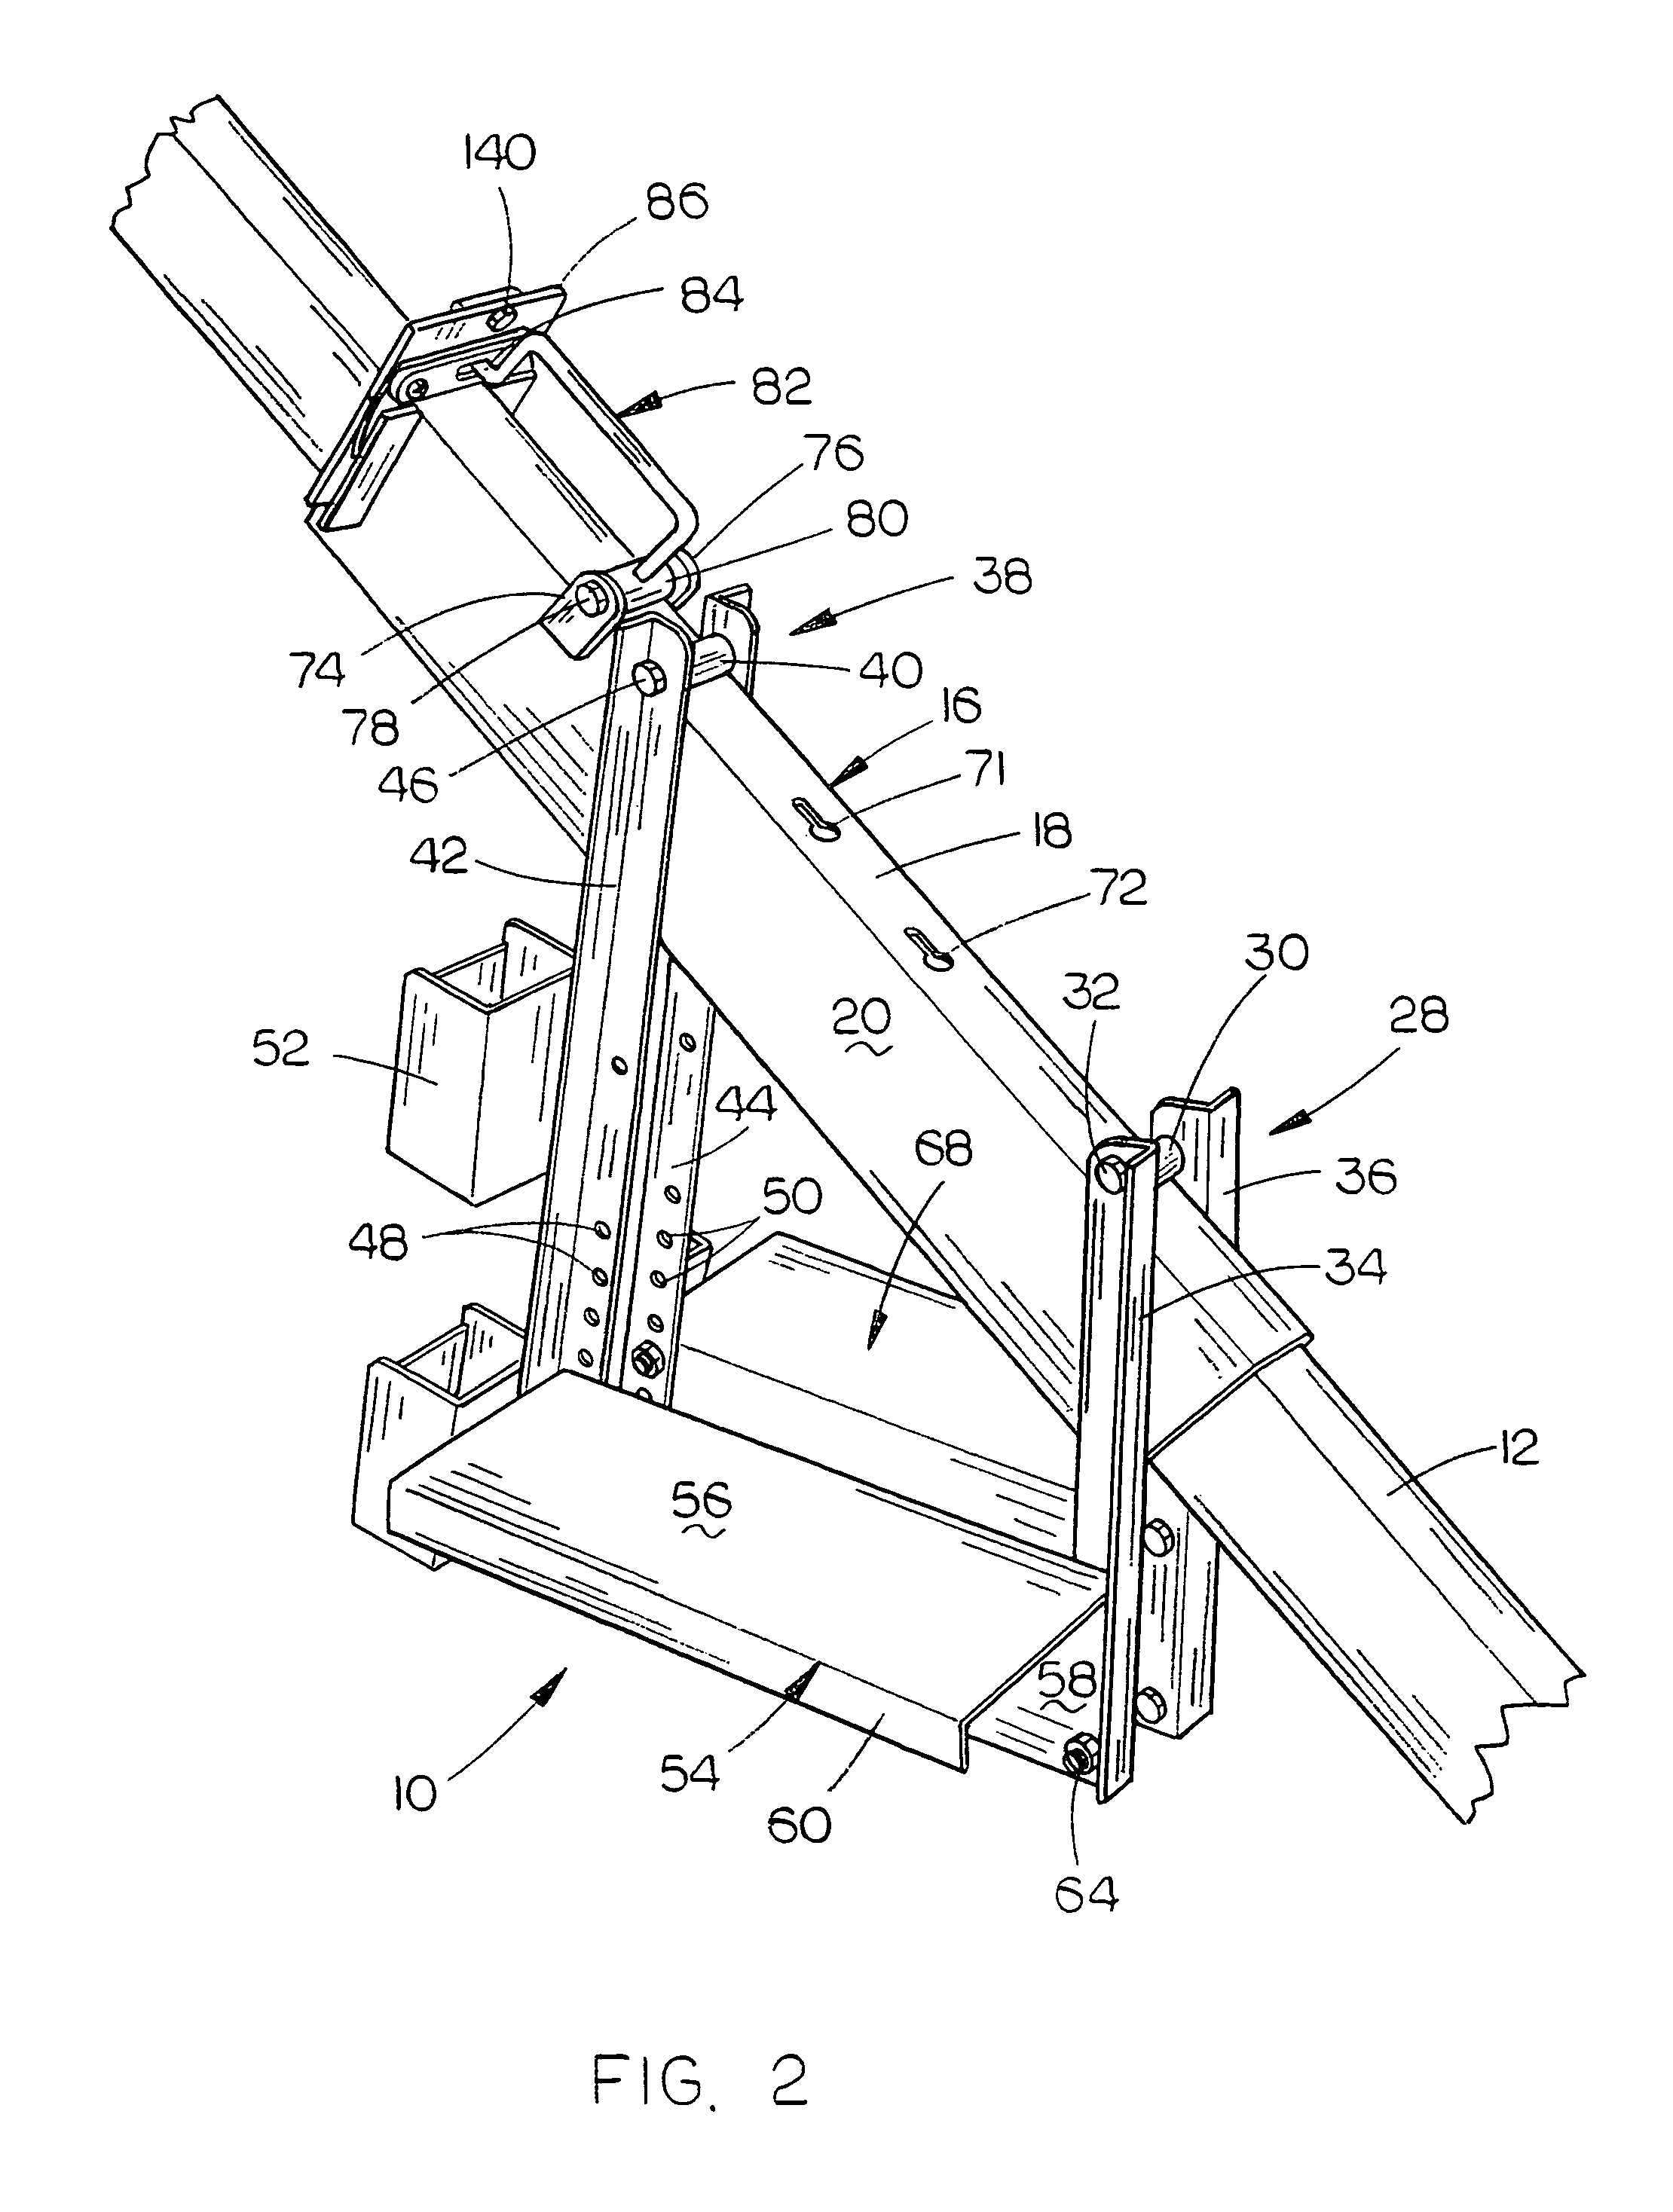 Apparatus for supporting a worker on an upper chord of a roof truss